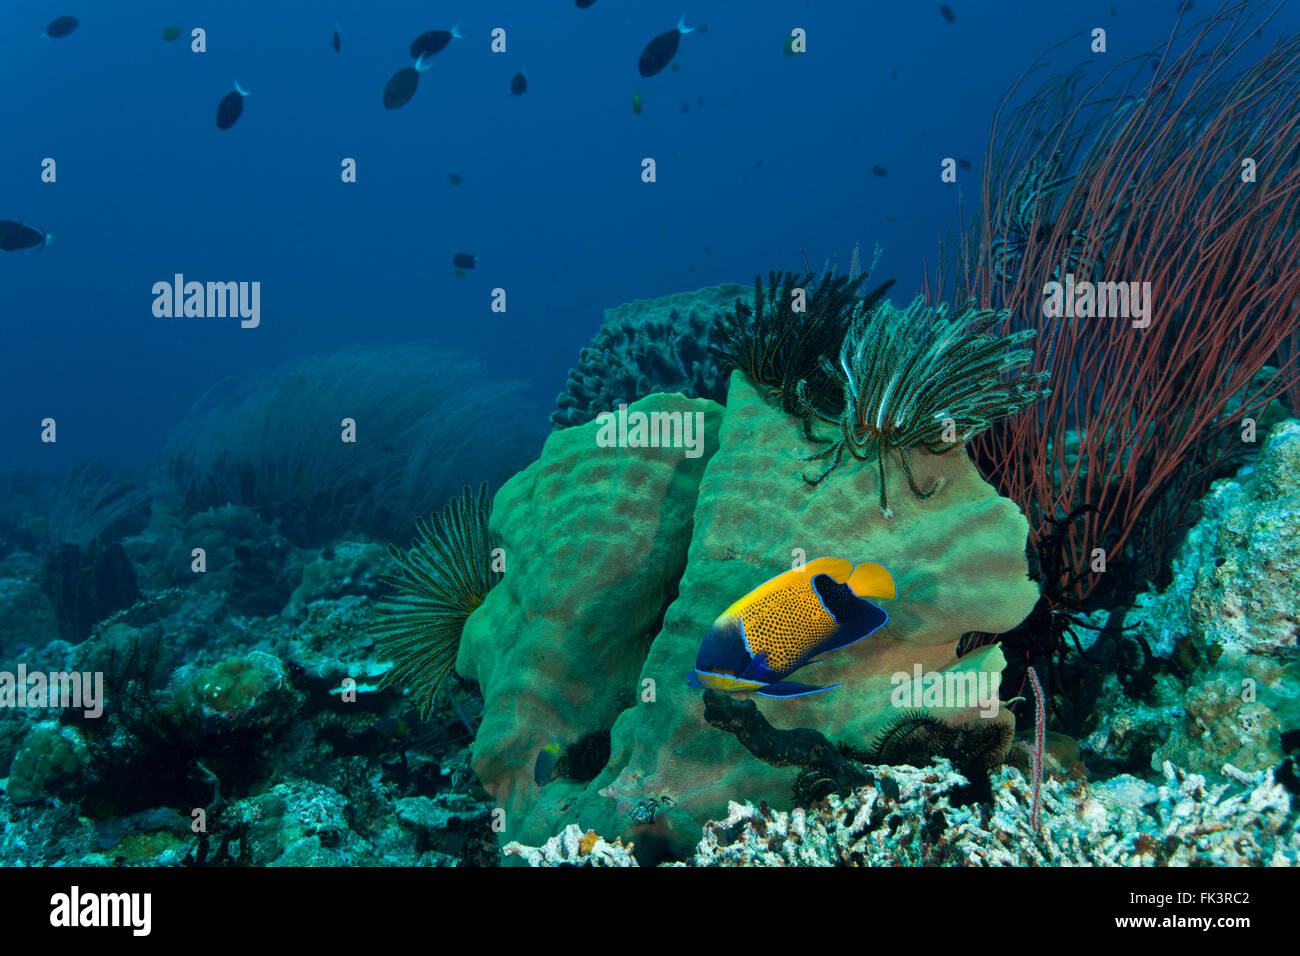 Majestic Angelfish  (Pomacanthus navarchus) in the reef amongst fan corals Stock Photo